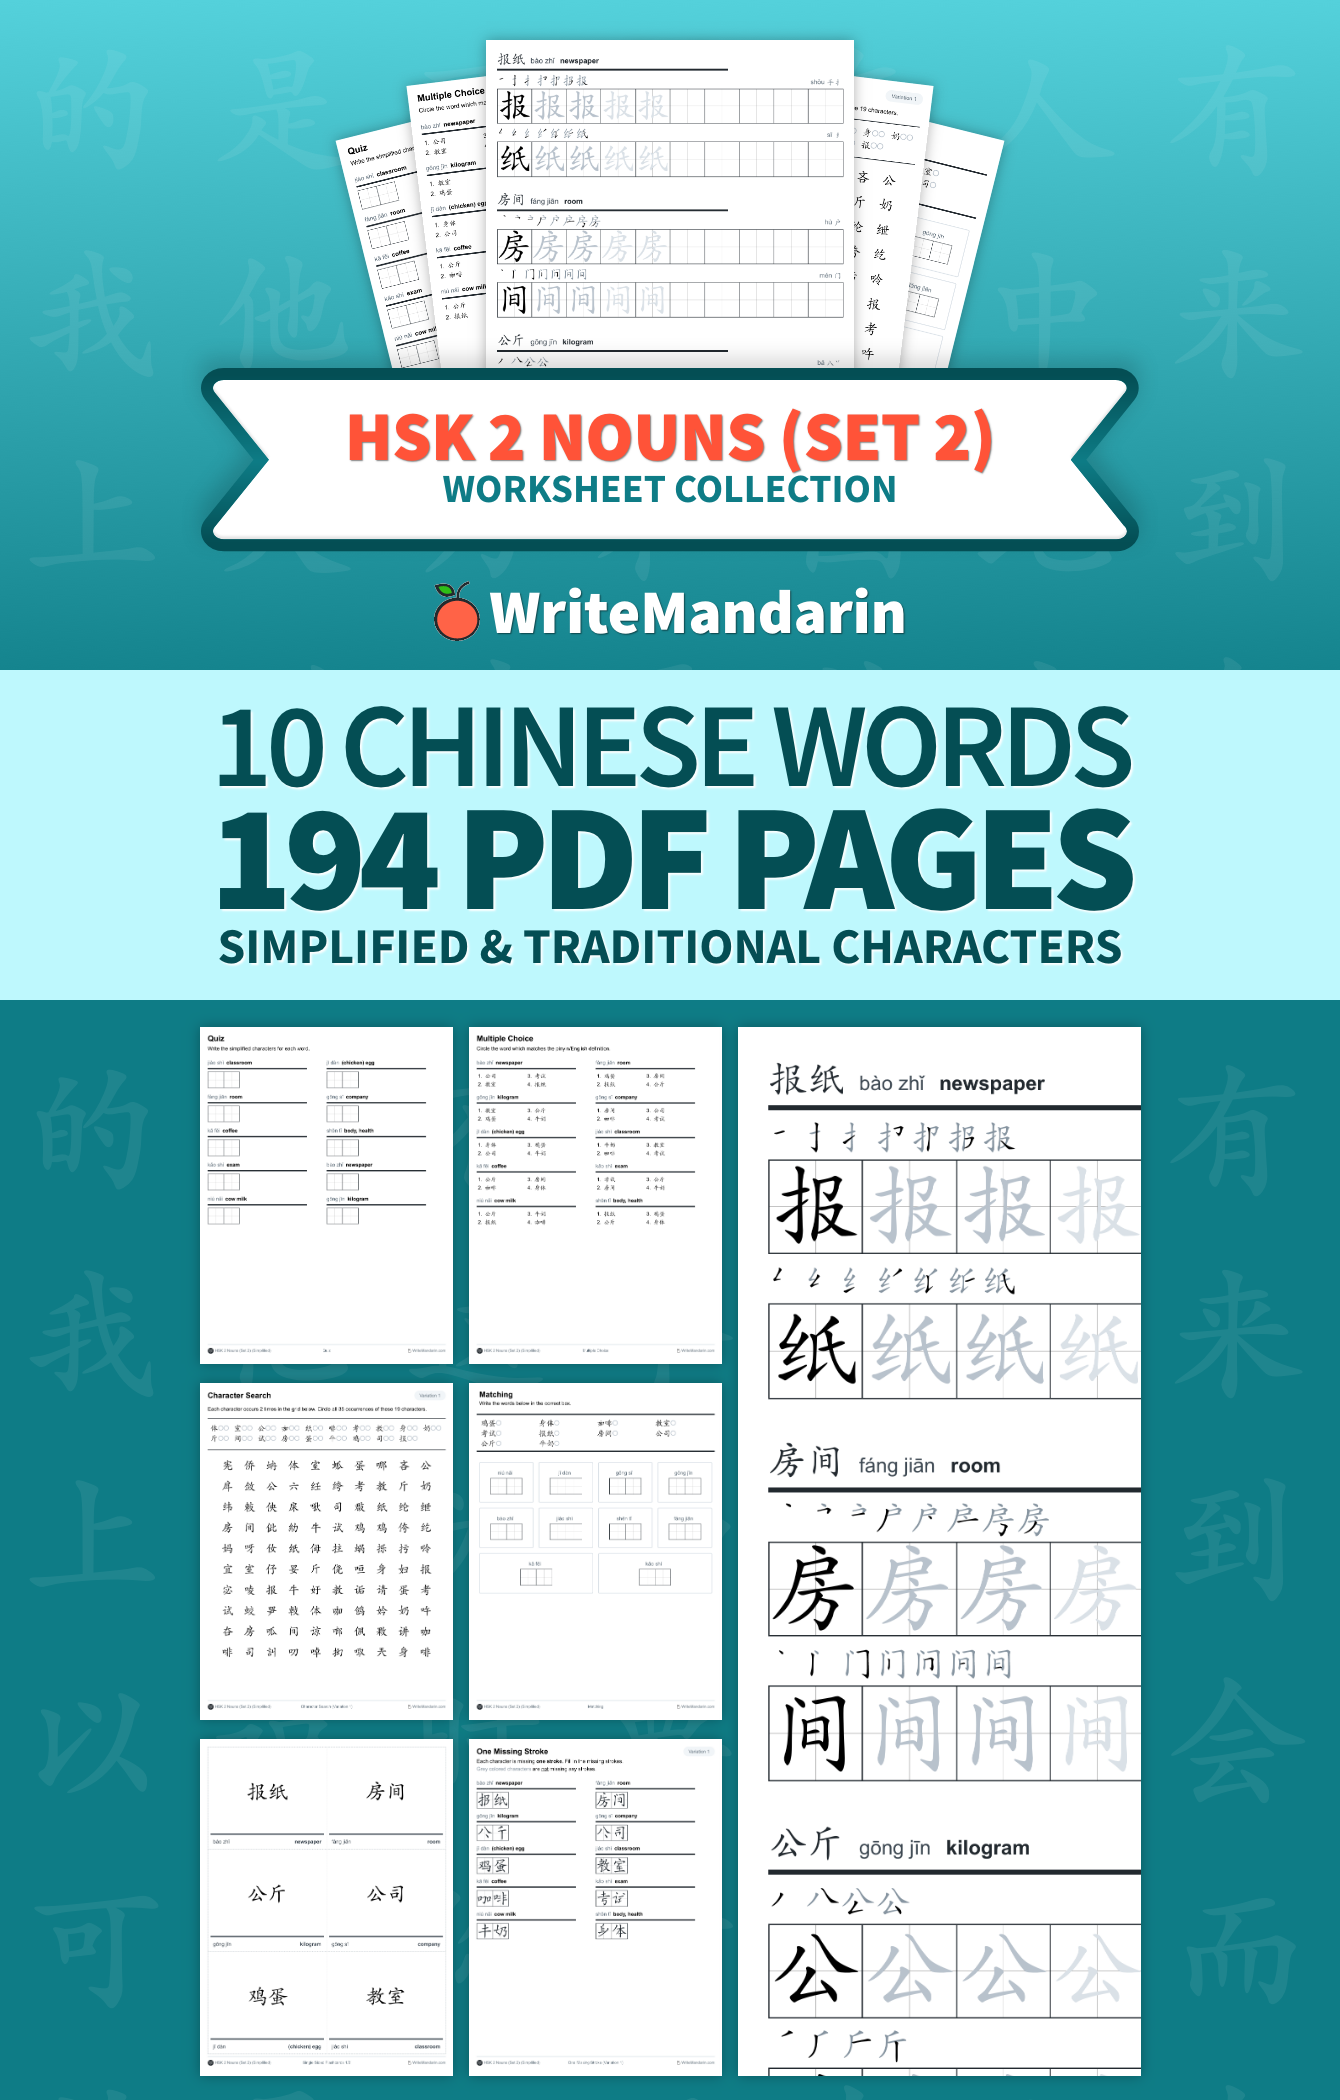 Preview image of HSK 2 Nouns (Set 2) worksheet collection